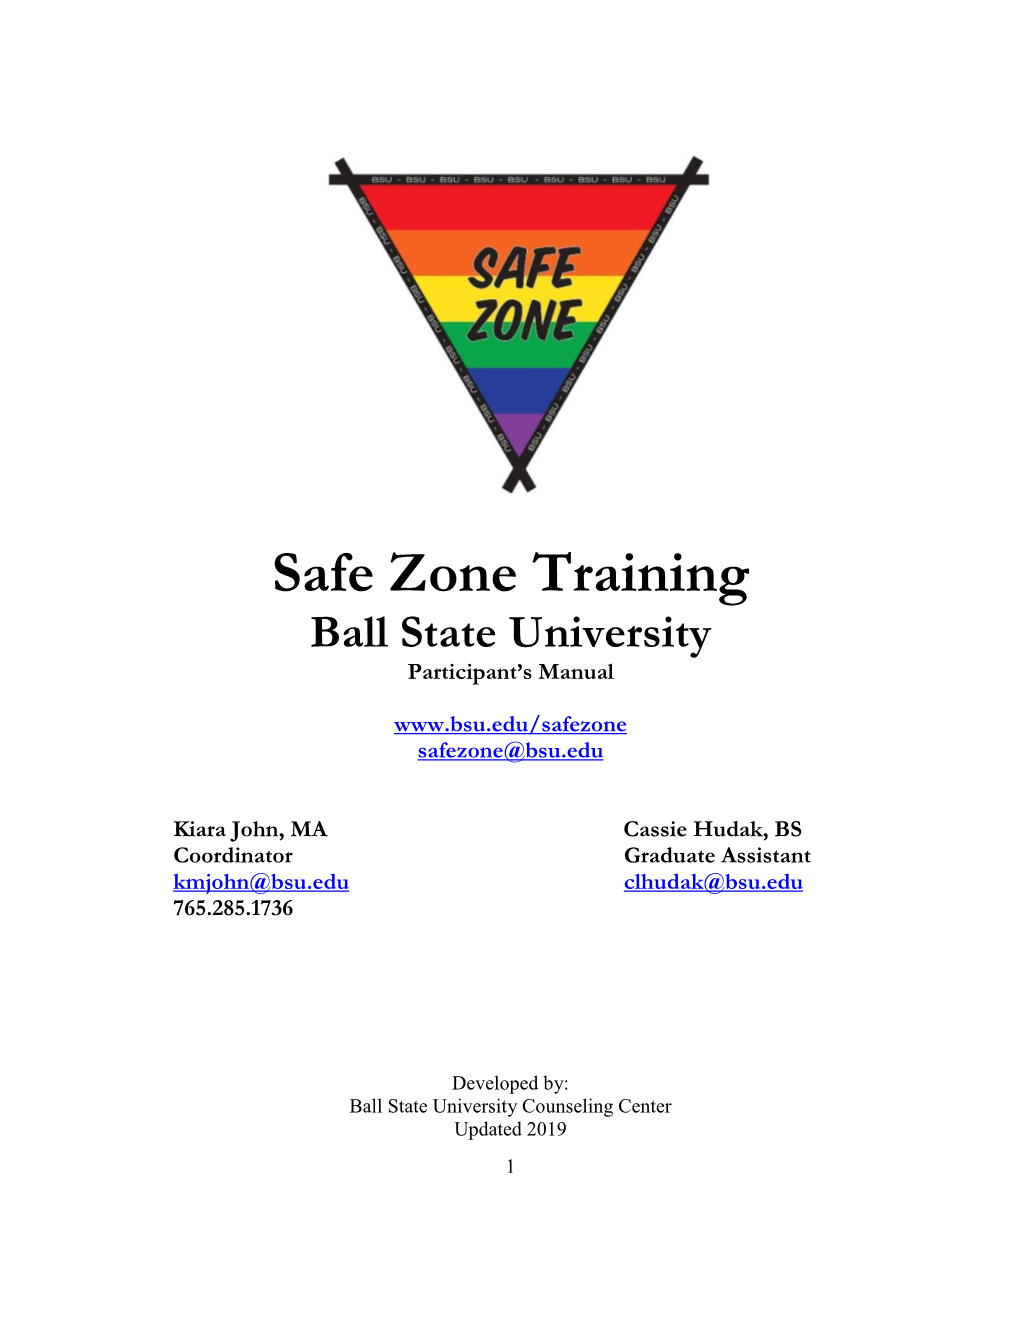 Safe Zone Training Ball State University Participant’S Manual